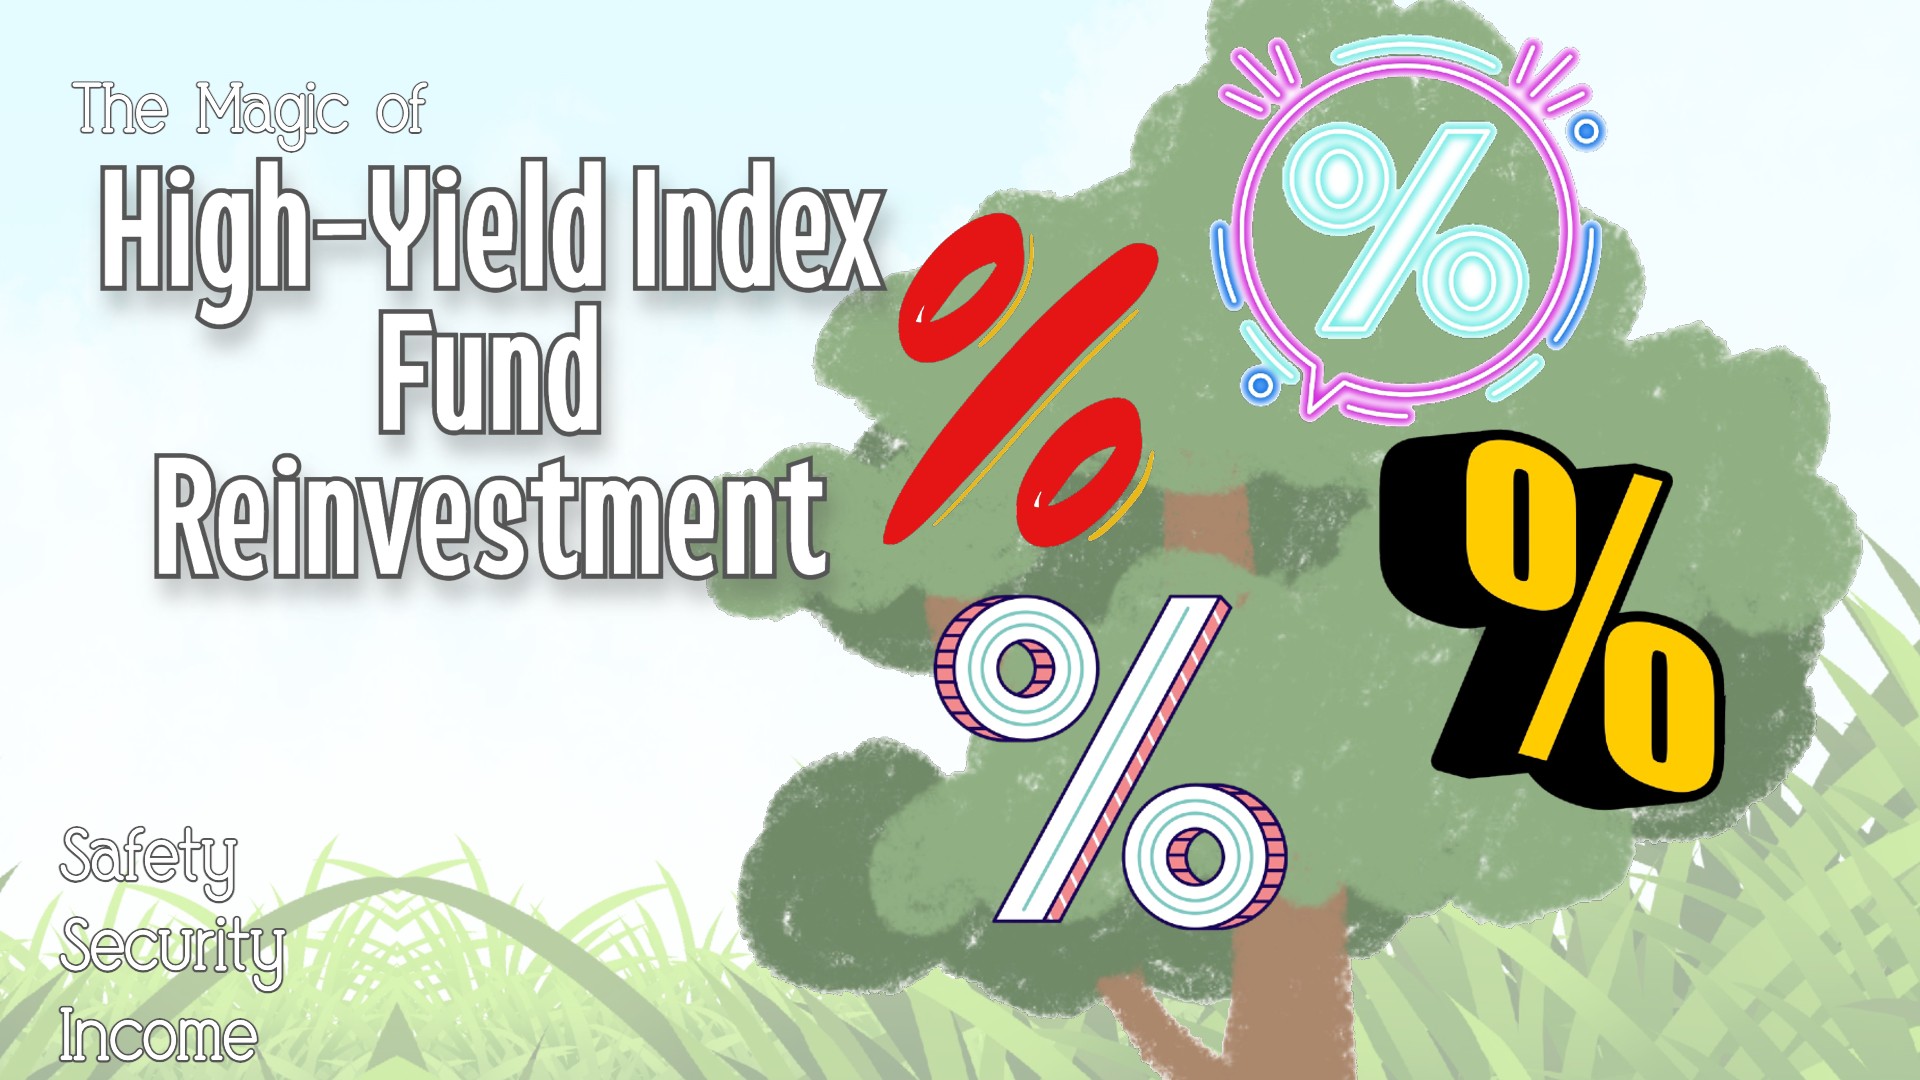 The Magic of High-Yield Index Fund Reinvestment